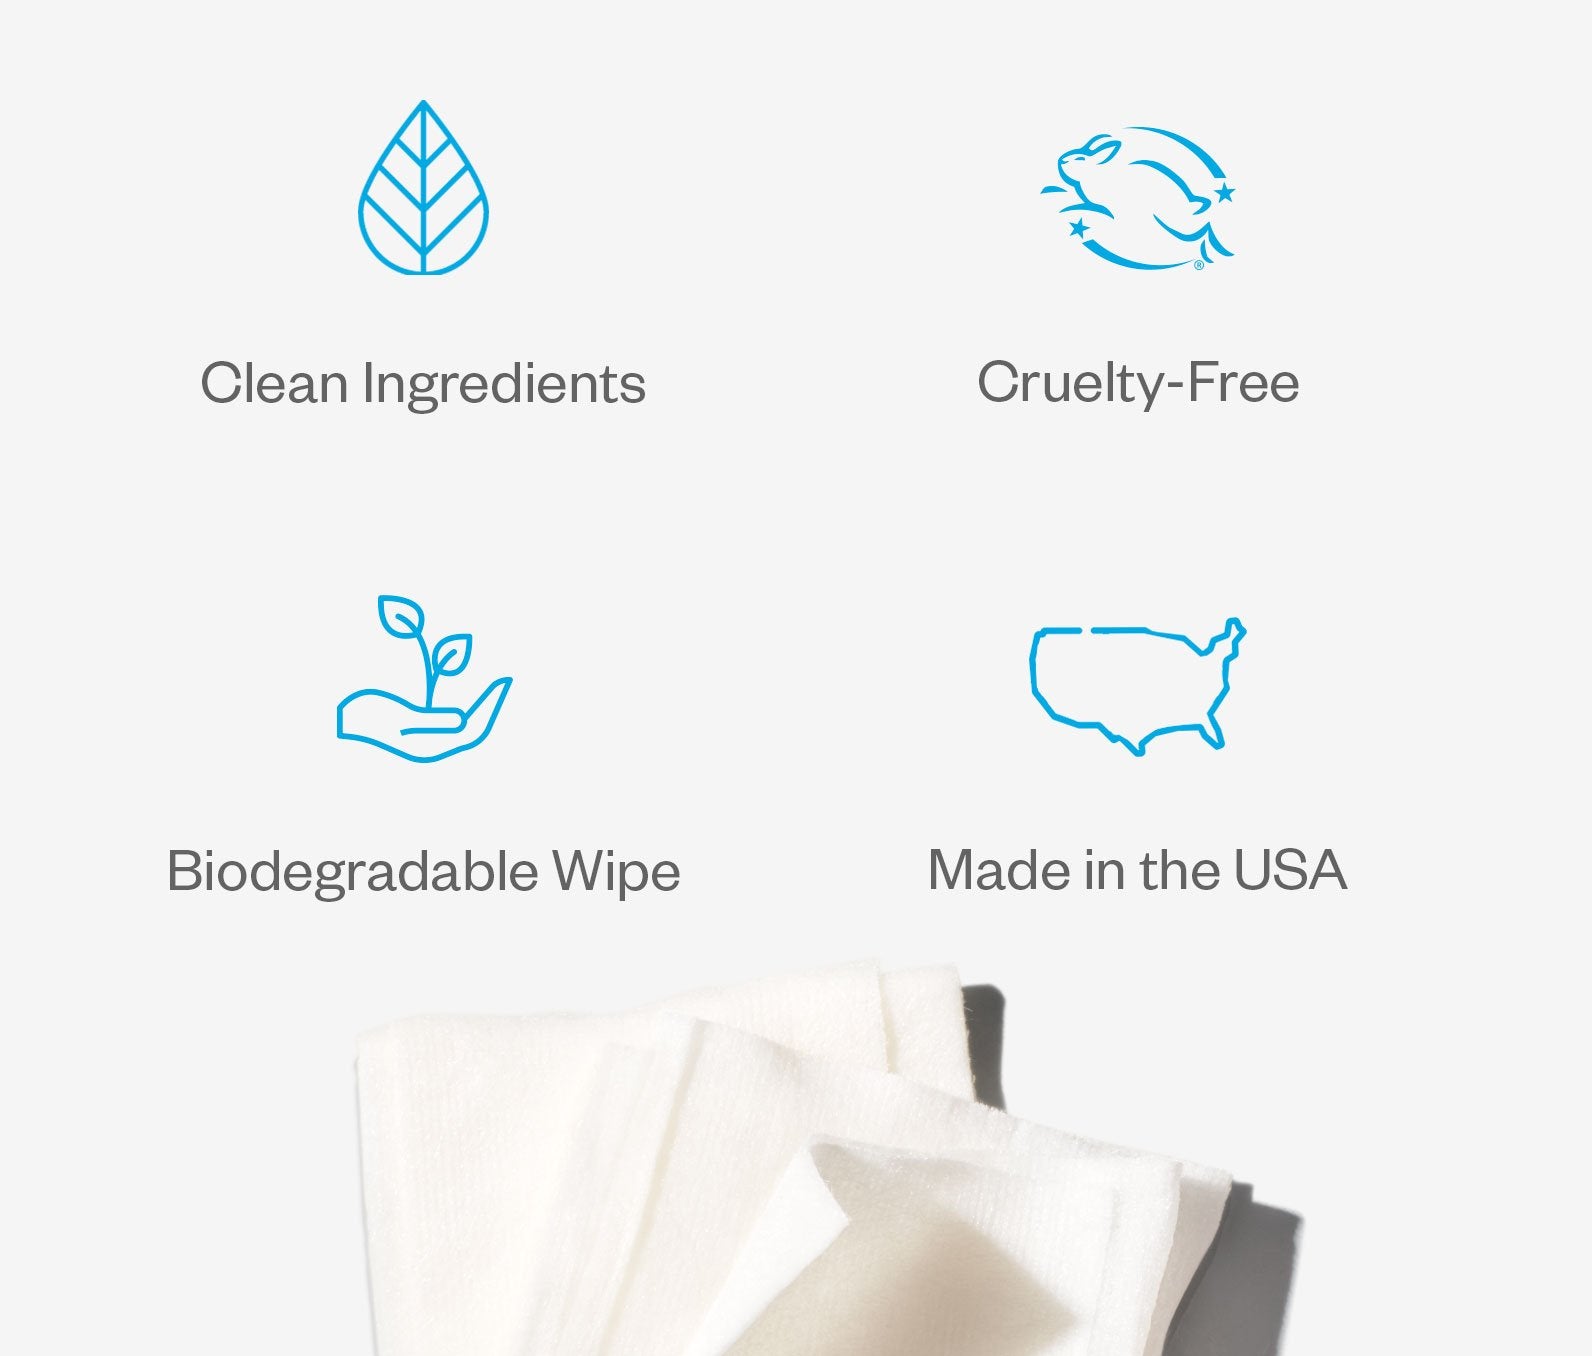 Ursa Major Essential Face Wipes made withcruelty free, clean ingredients and biodegradeable. Made in the USA.